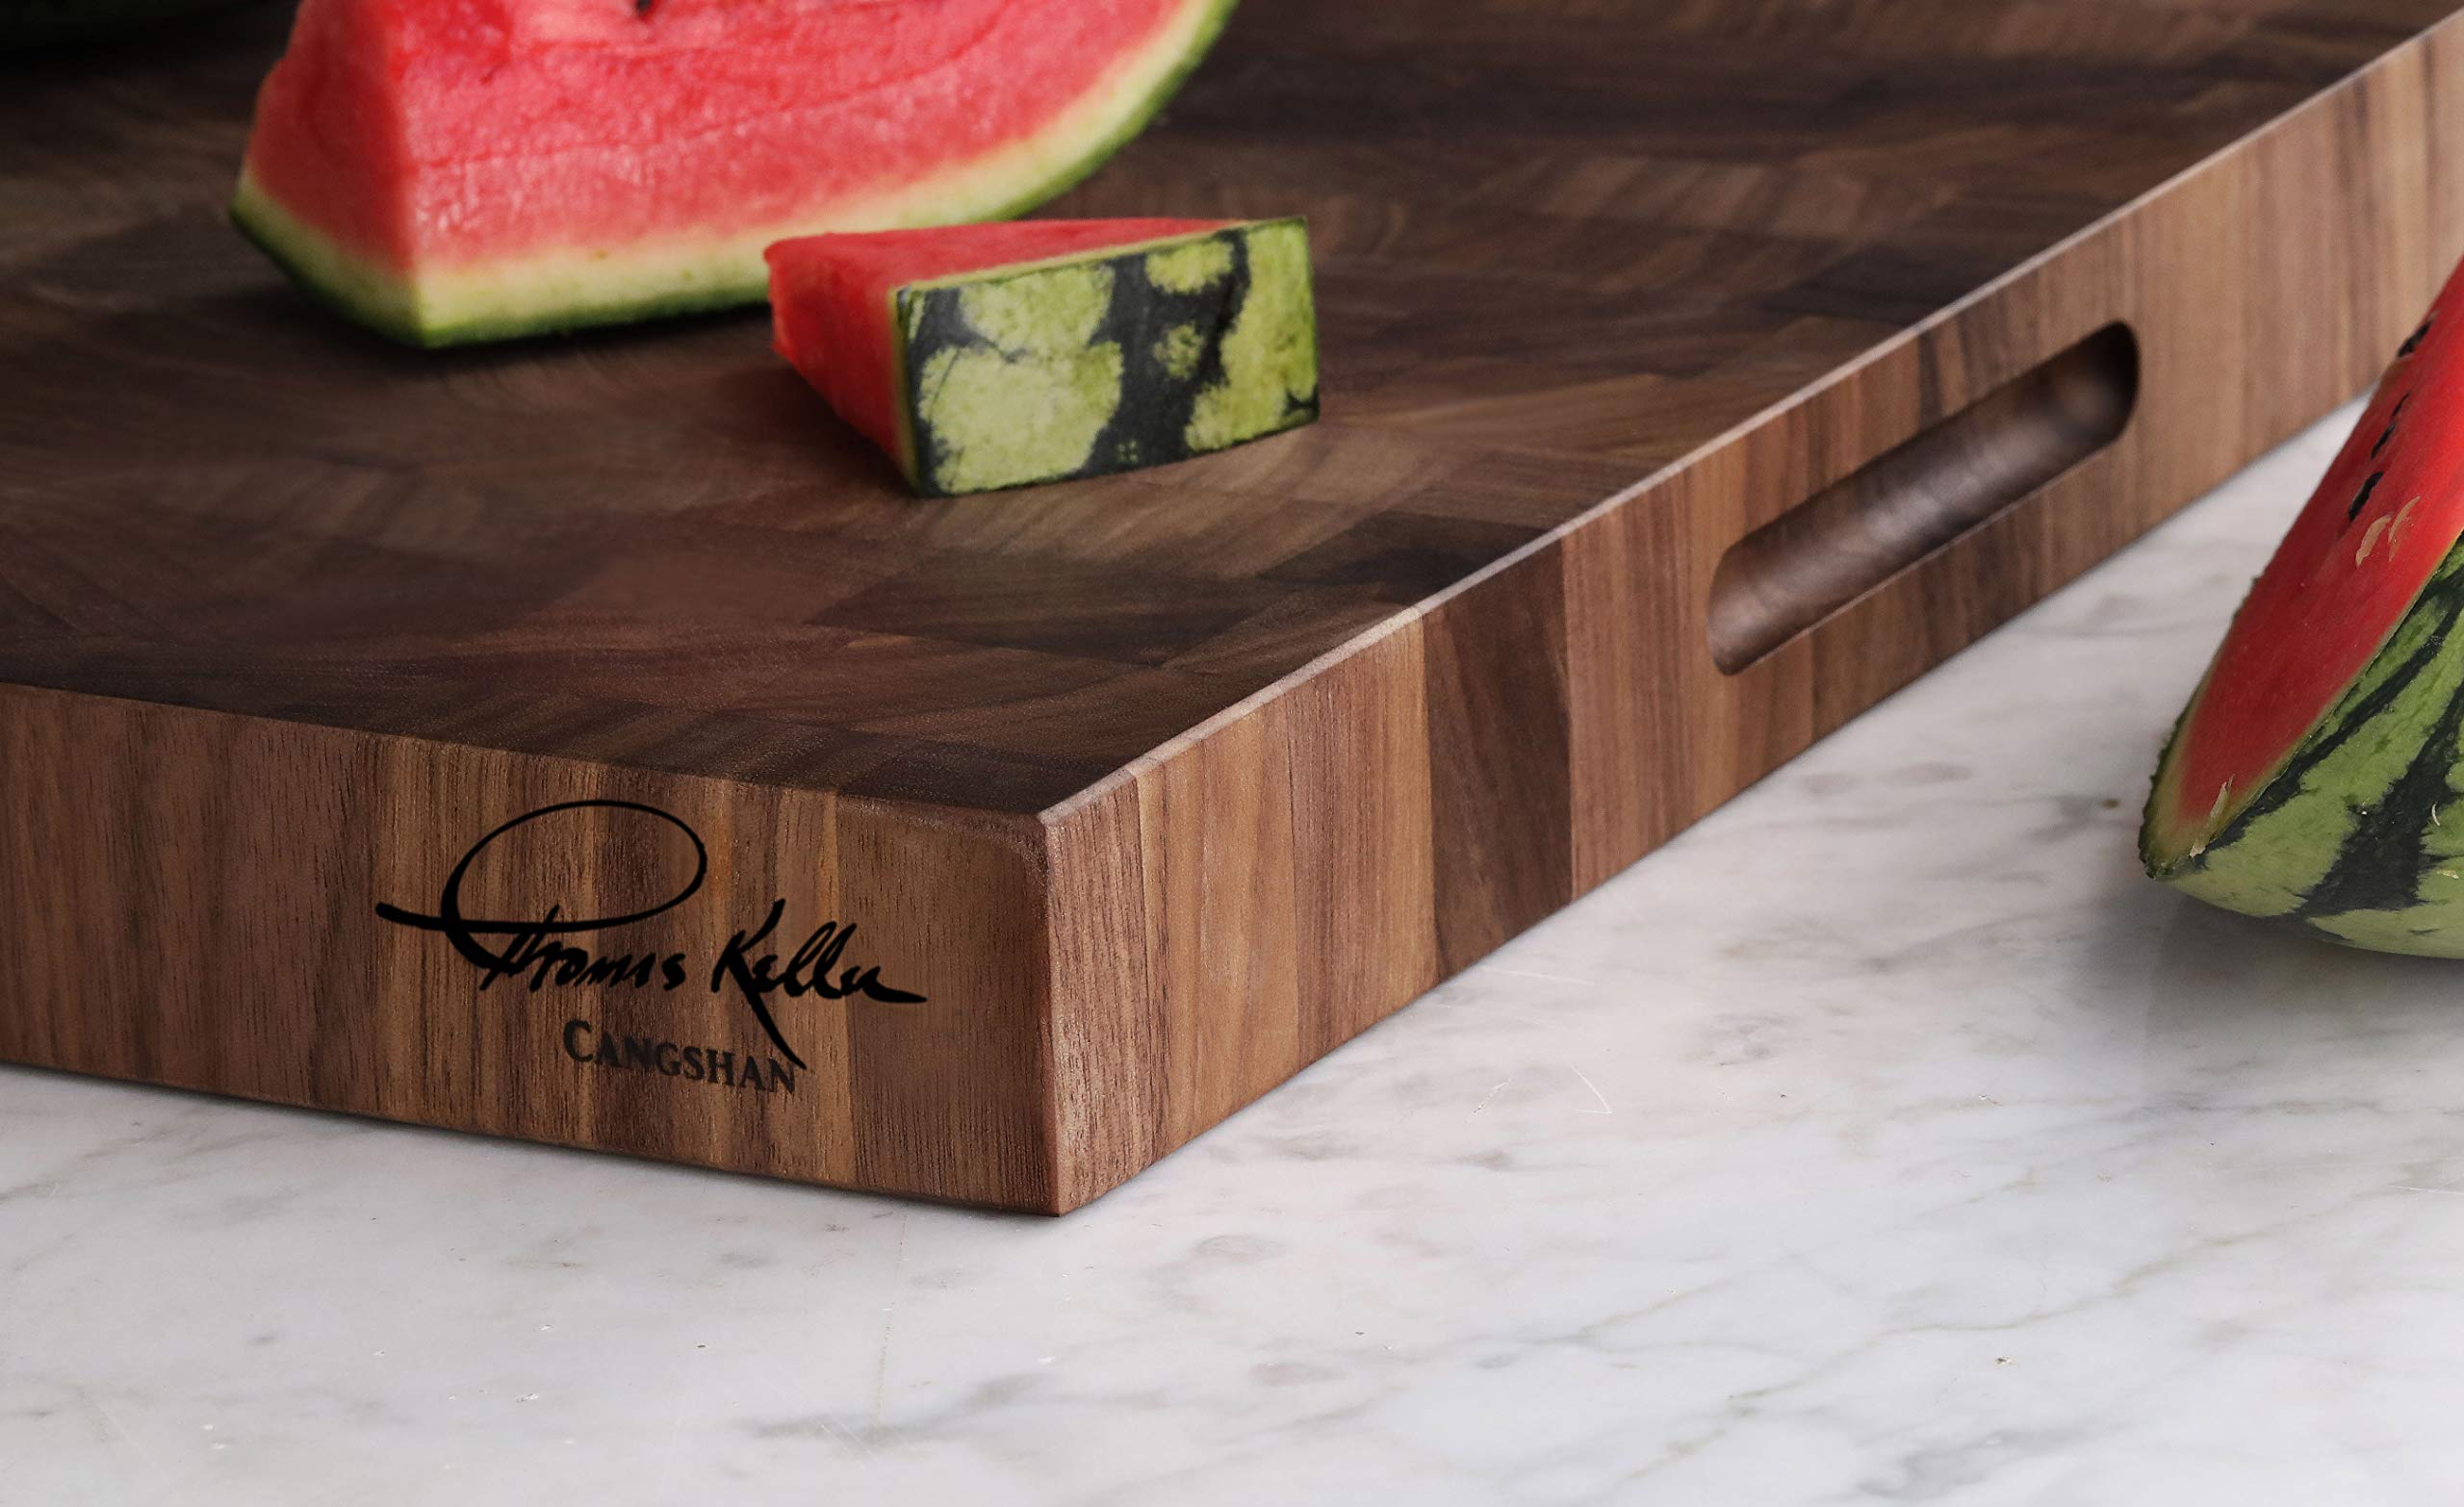 Cangshan | Thomas Keller Signature Collection Walnut End-Grain Cutting Board,14 x 20 x 1.5", Crafted in USA